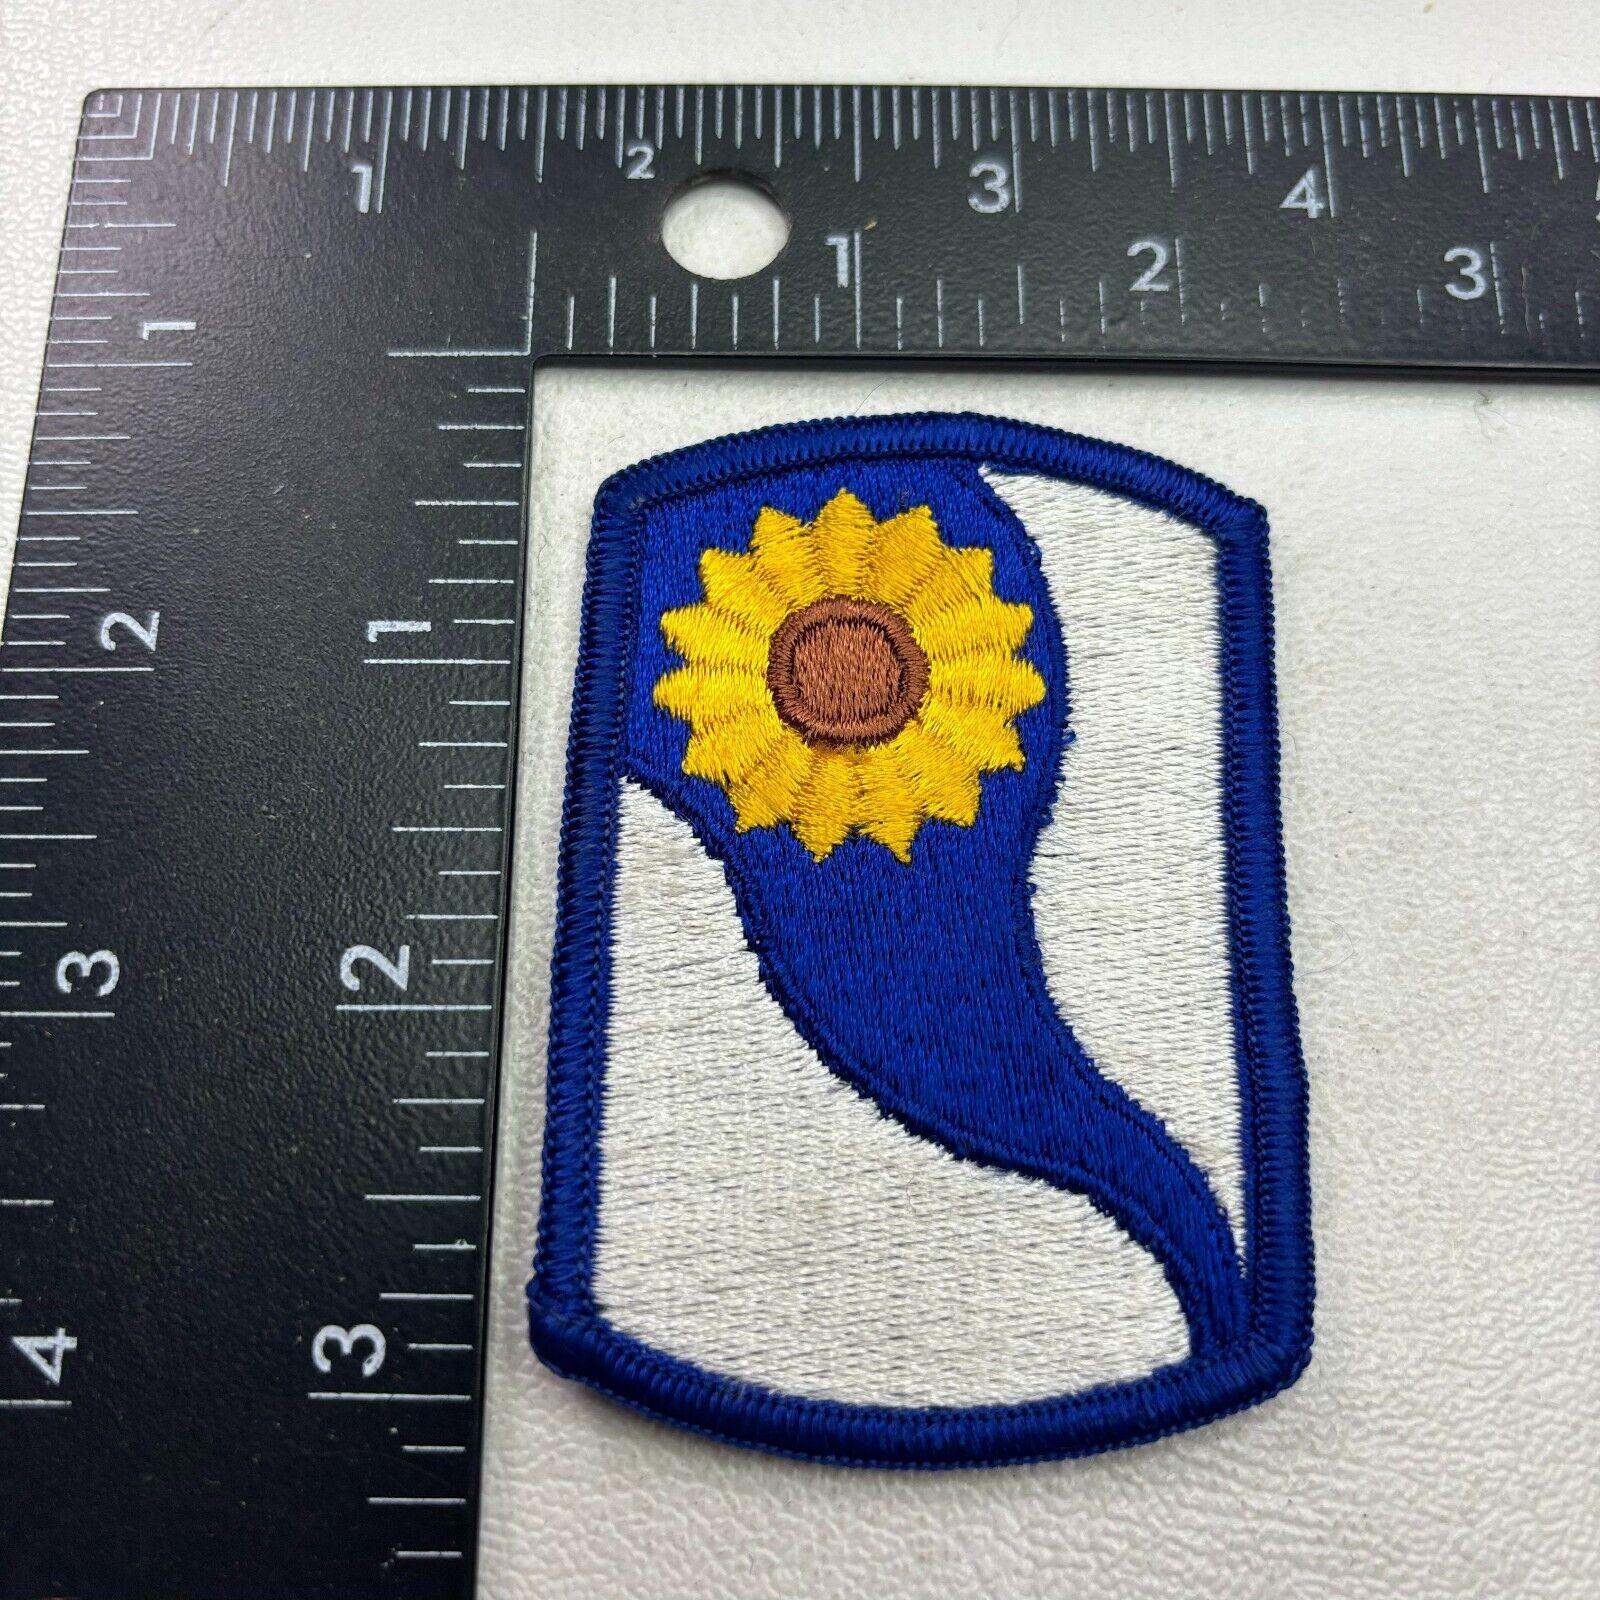 United States Army 69TH INFANTRY BRIGADE KANSAS ARMY NATIONAL GUARD Patch 41MZ